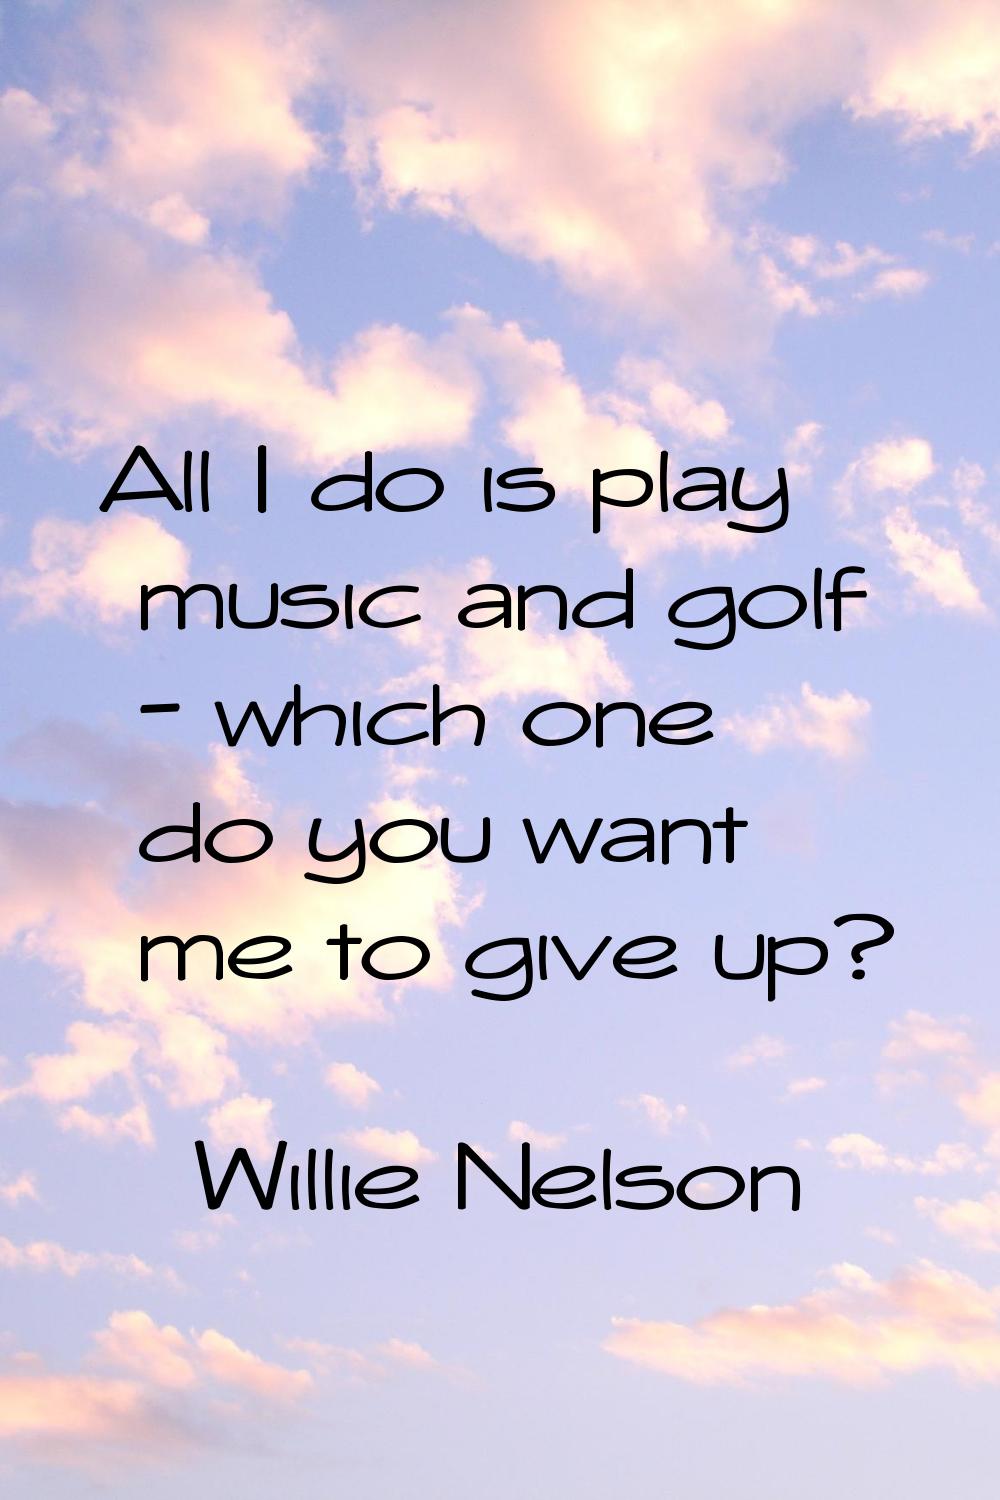 All I do is play music and golf - which one do you want me to give up?